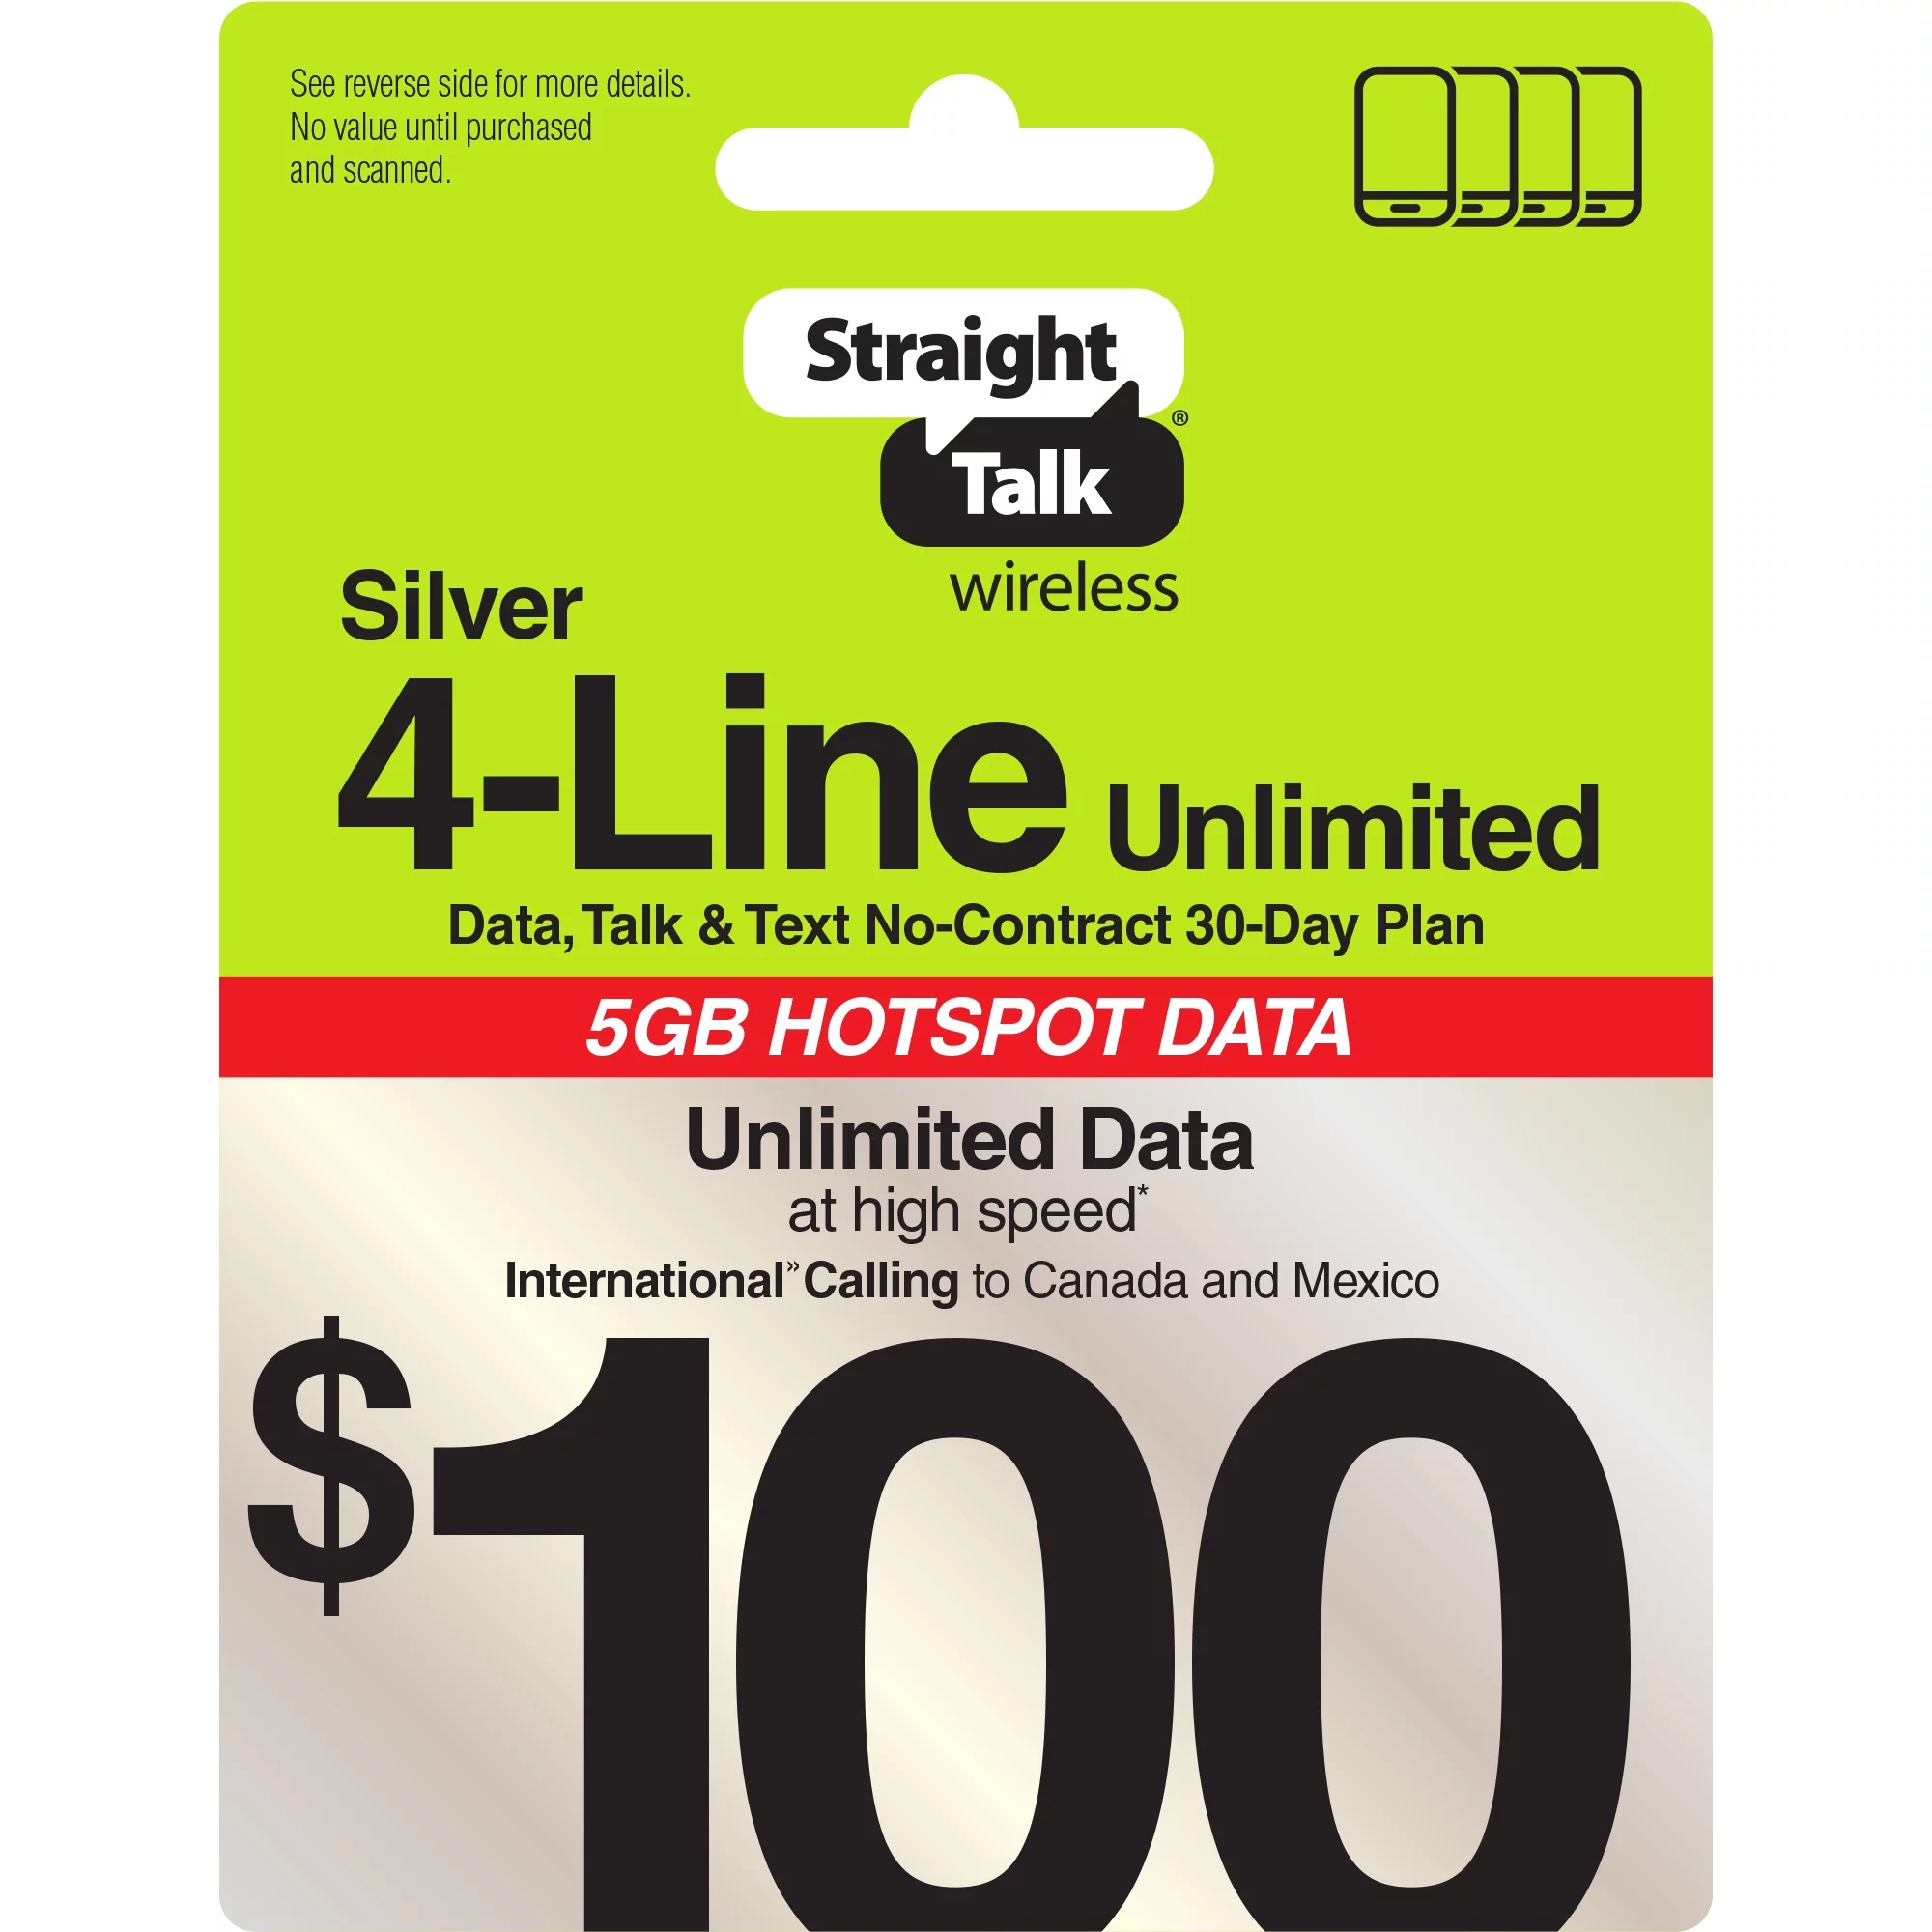 Straight Talk $100 Silver 4-Line Unlimited 30-Day Prepaid Plan + 5GB Hotspot Data + Int'l Calling e-PIN Top Up (Email Delivery)